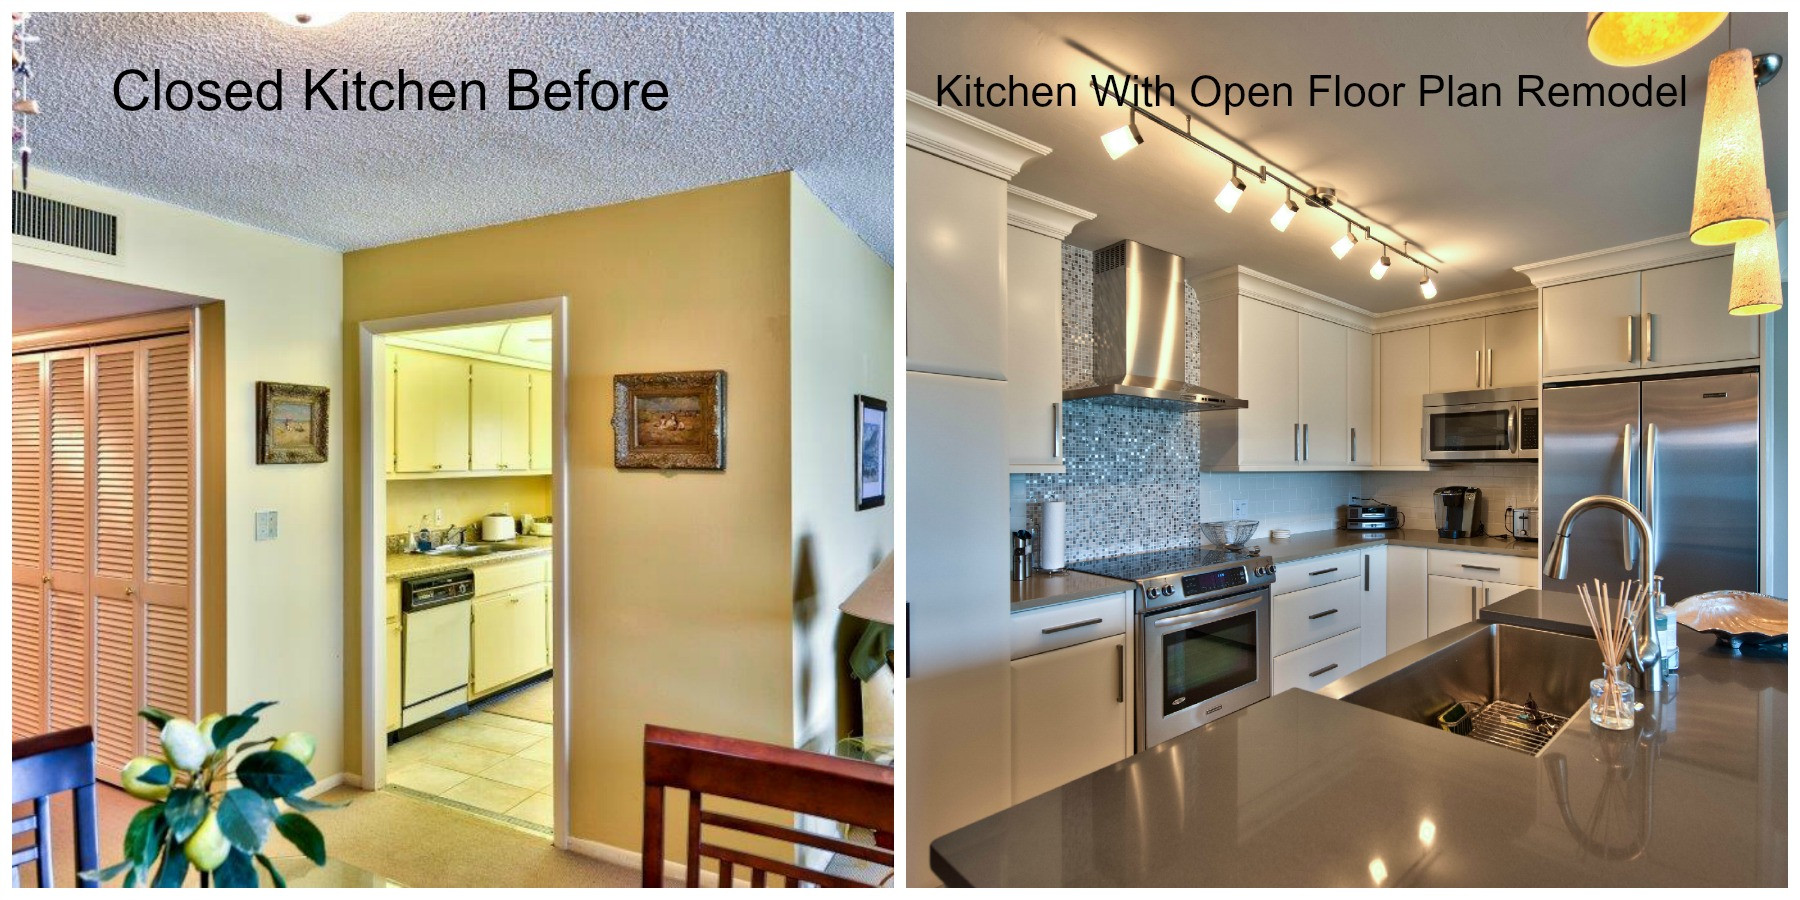 Kitchen Remodels Before And After
 Kitchen Before and After s PALM BROTHERS REMODELING